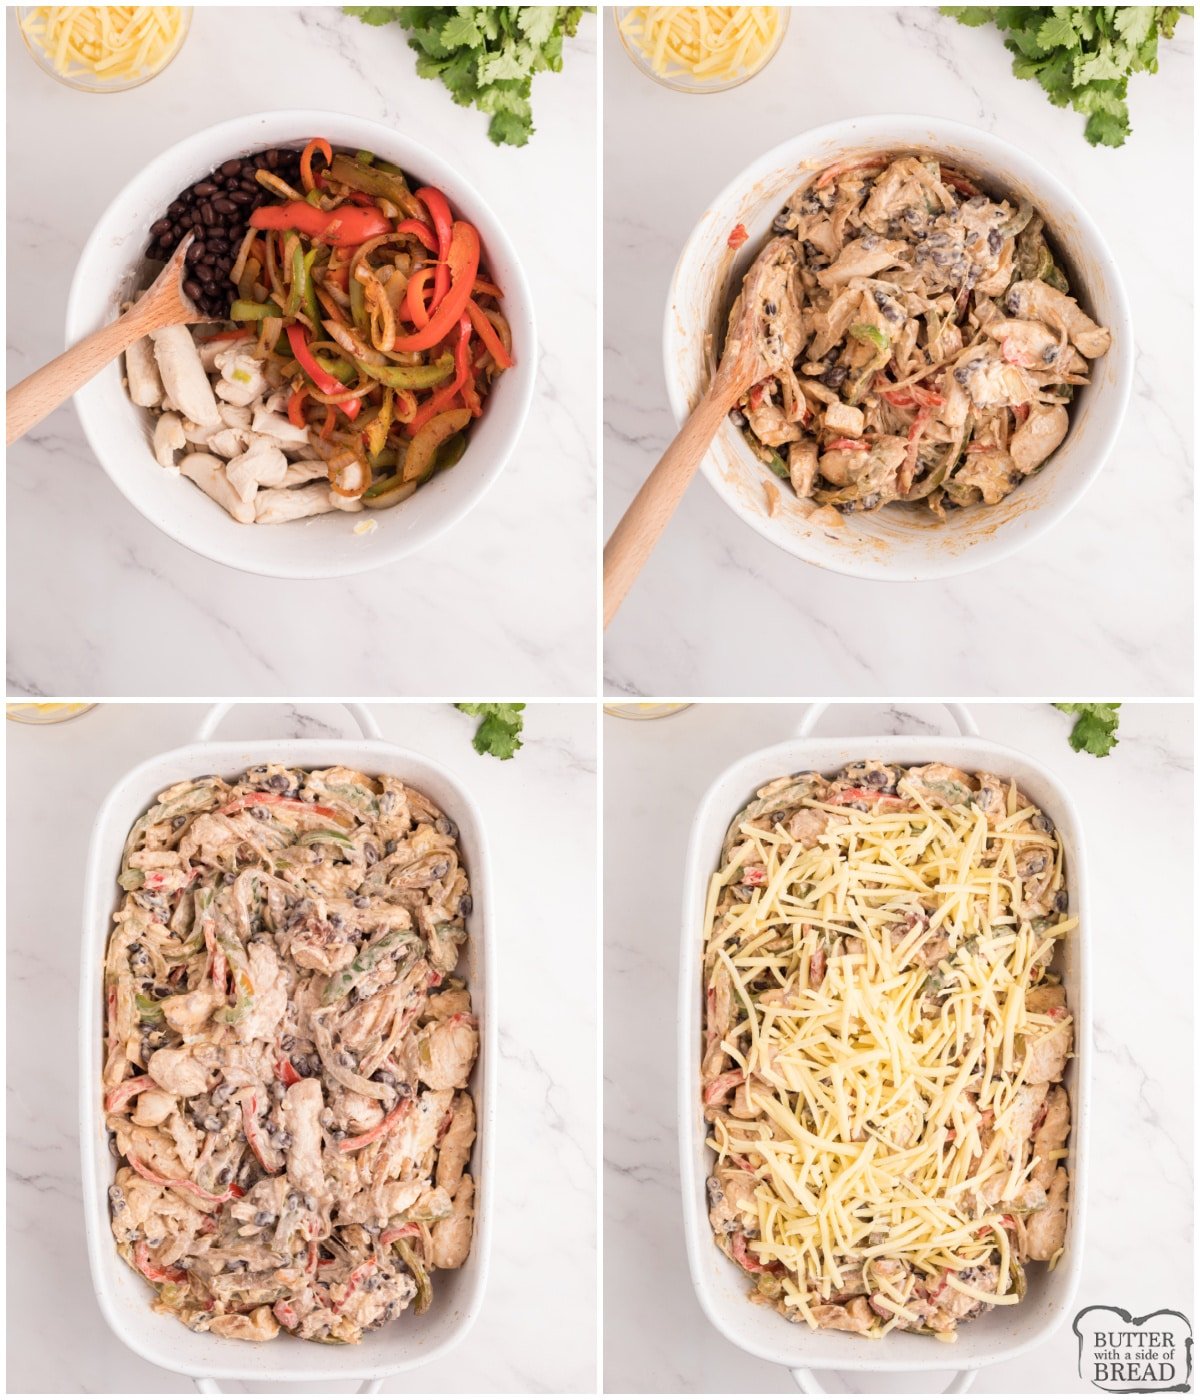 Step by step instructions on how to assemble Chicken Fajita Casserole recipe